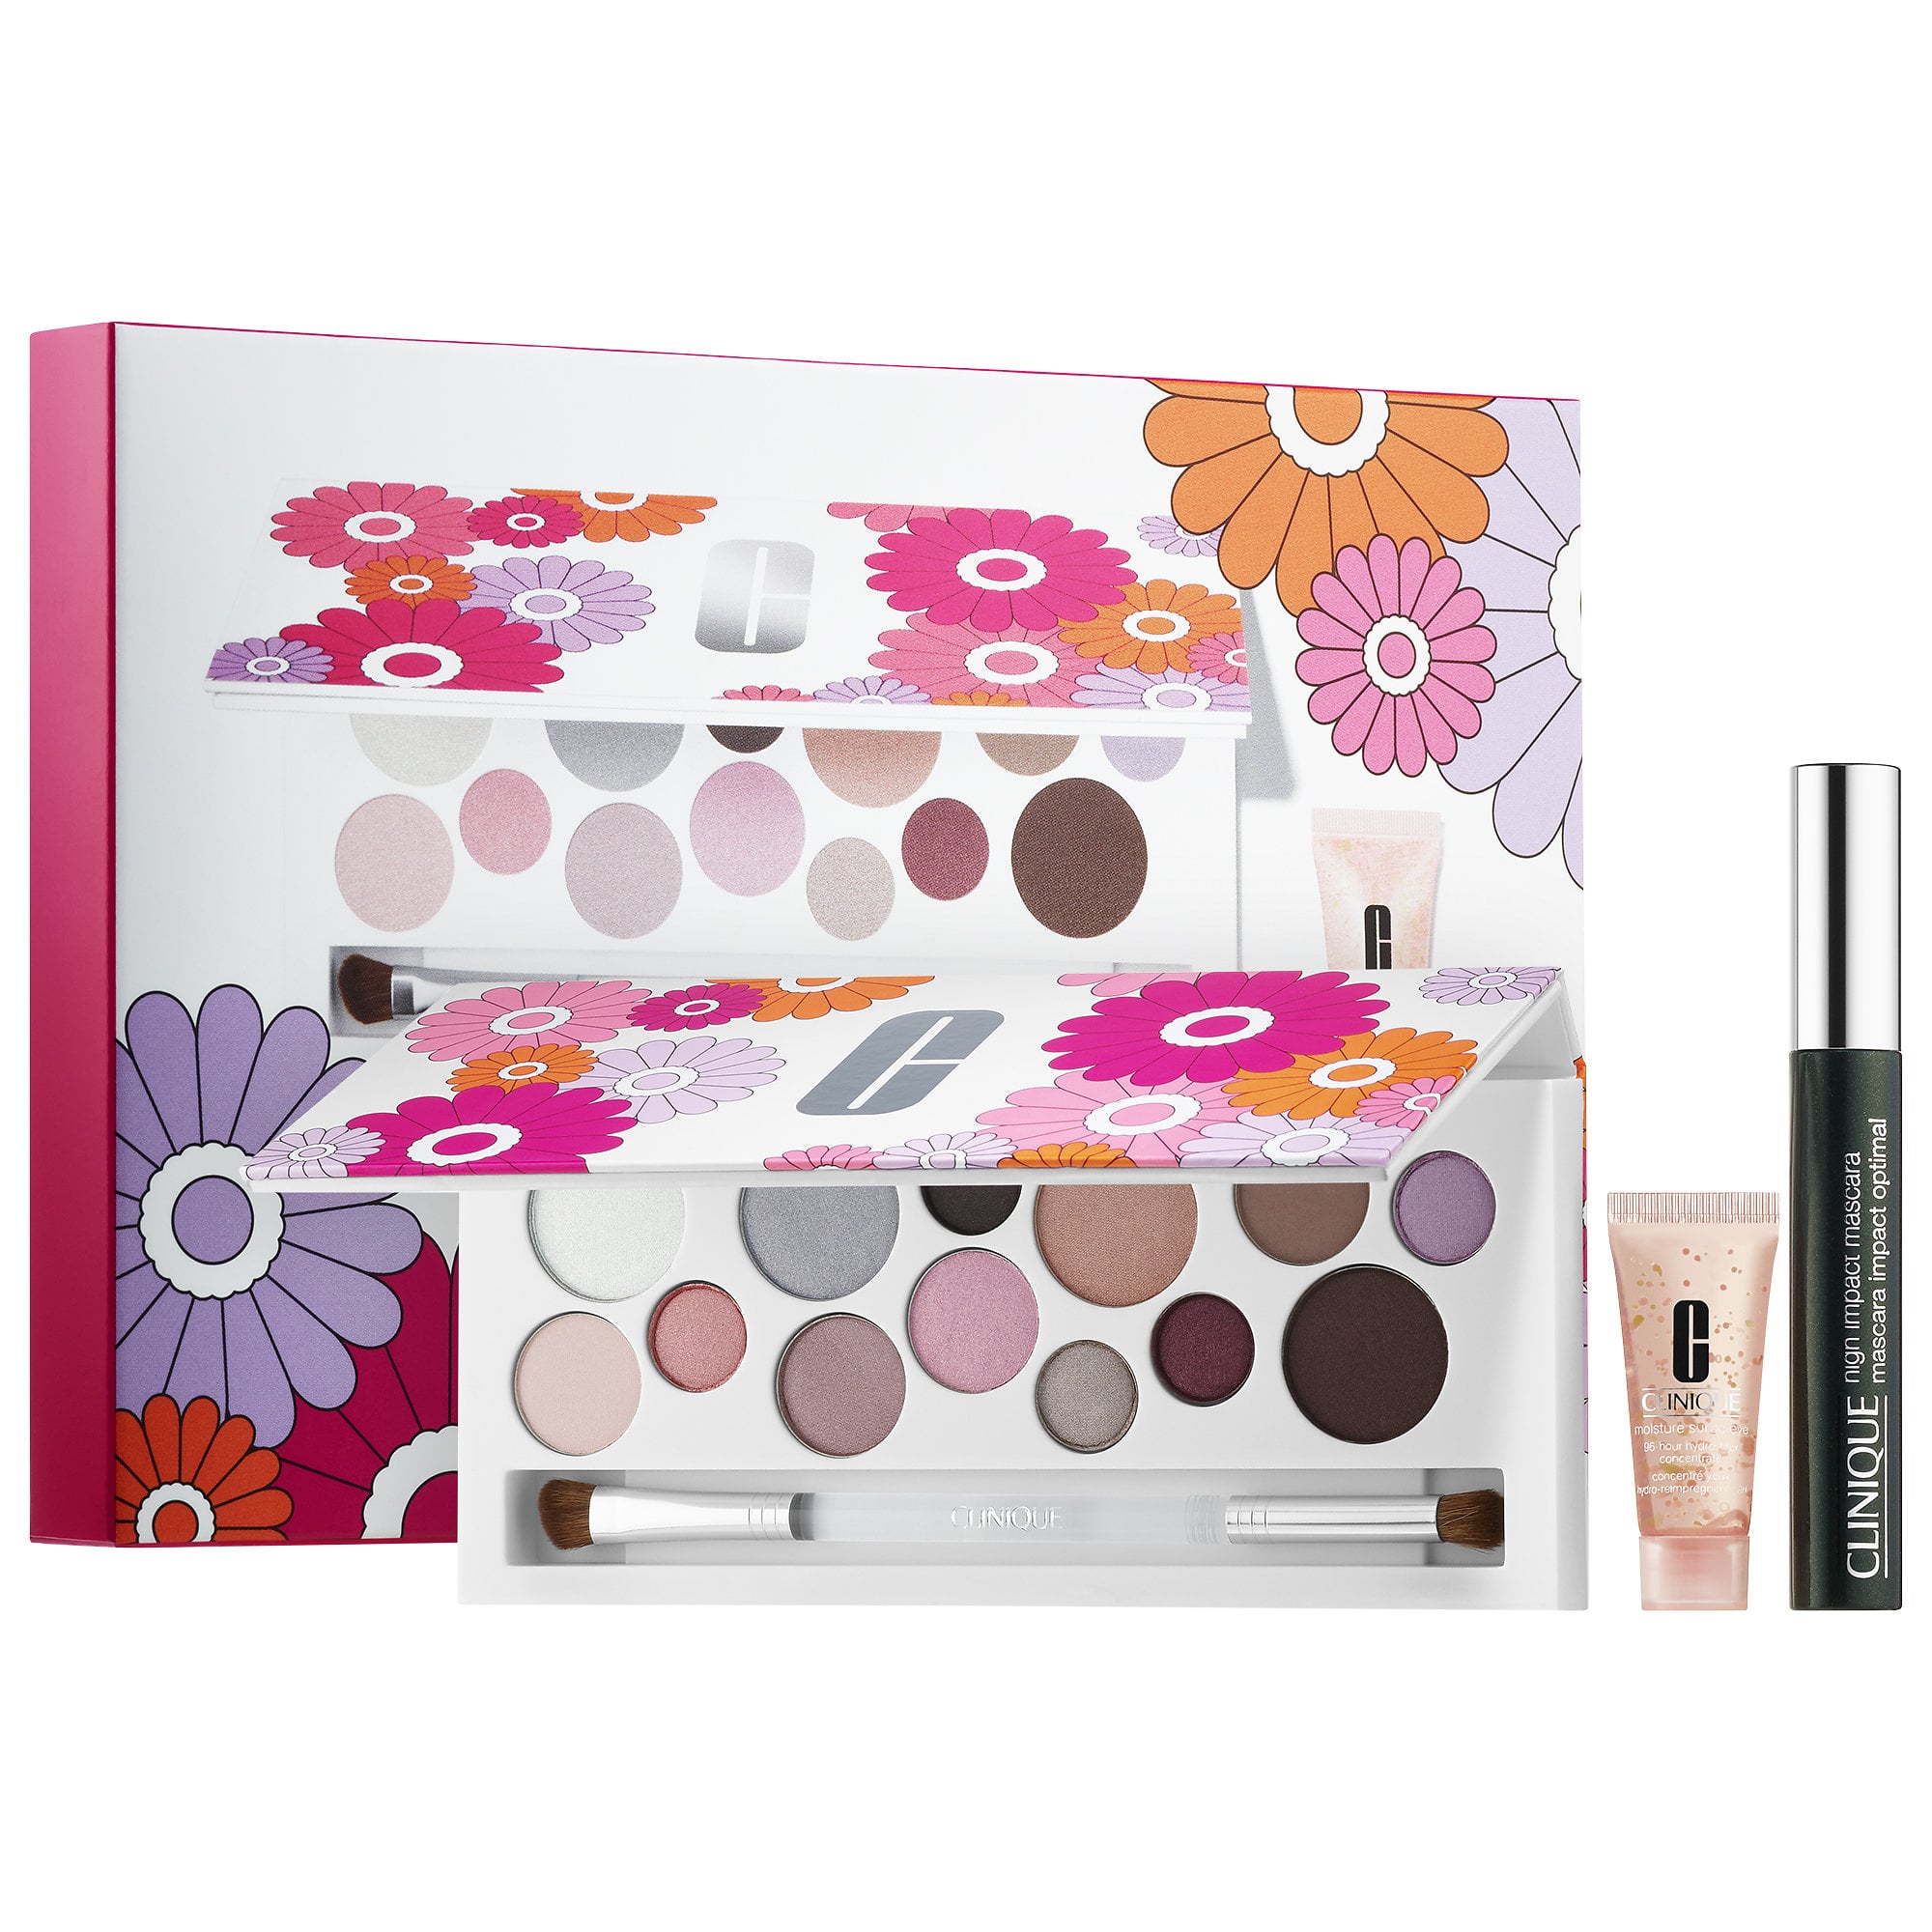 veld klein zonsondergang Clinique Light Up Your Eyes Eyeshadow Palette Set | There's a Ton of New  Makeup at Sephora For Summer, but We Picked Our 35 Favorites | POPSUGAR  Beauty Photo 22